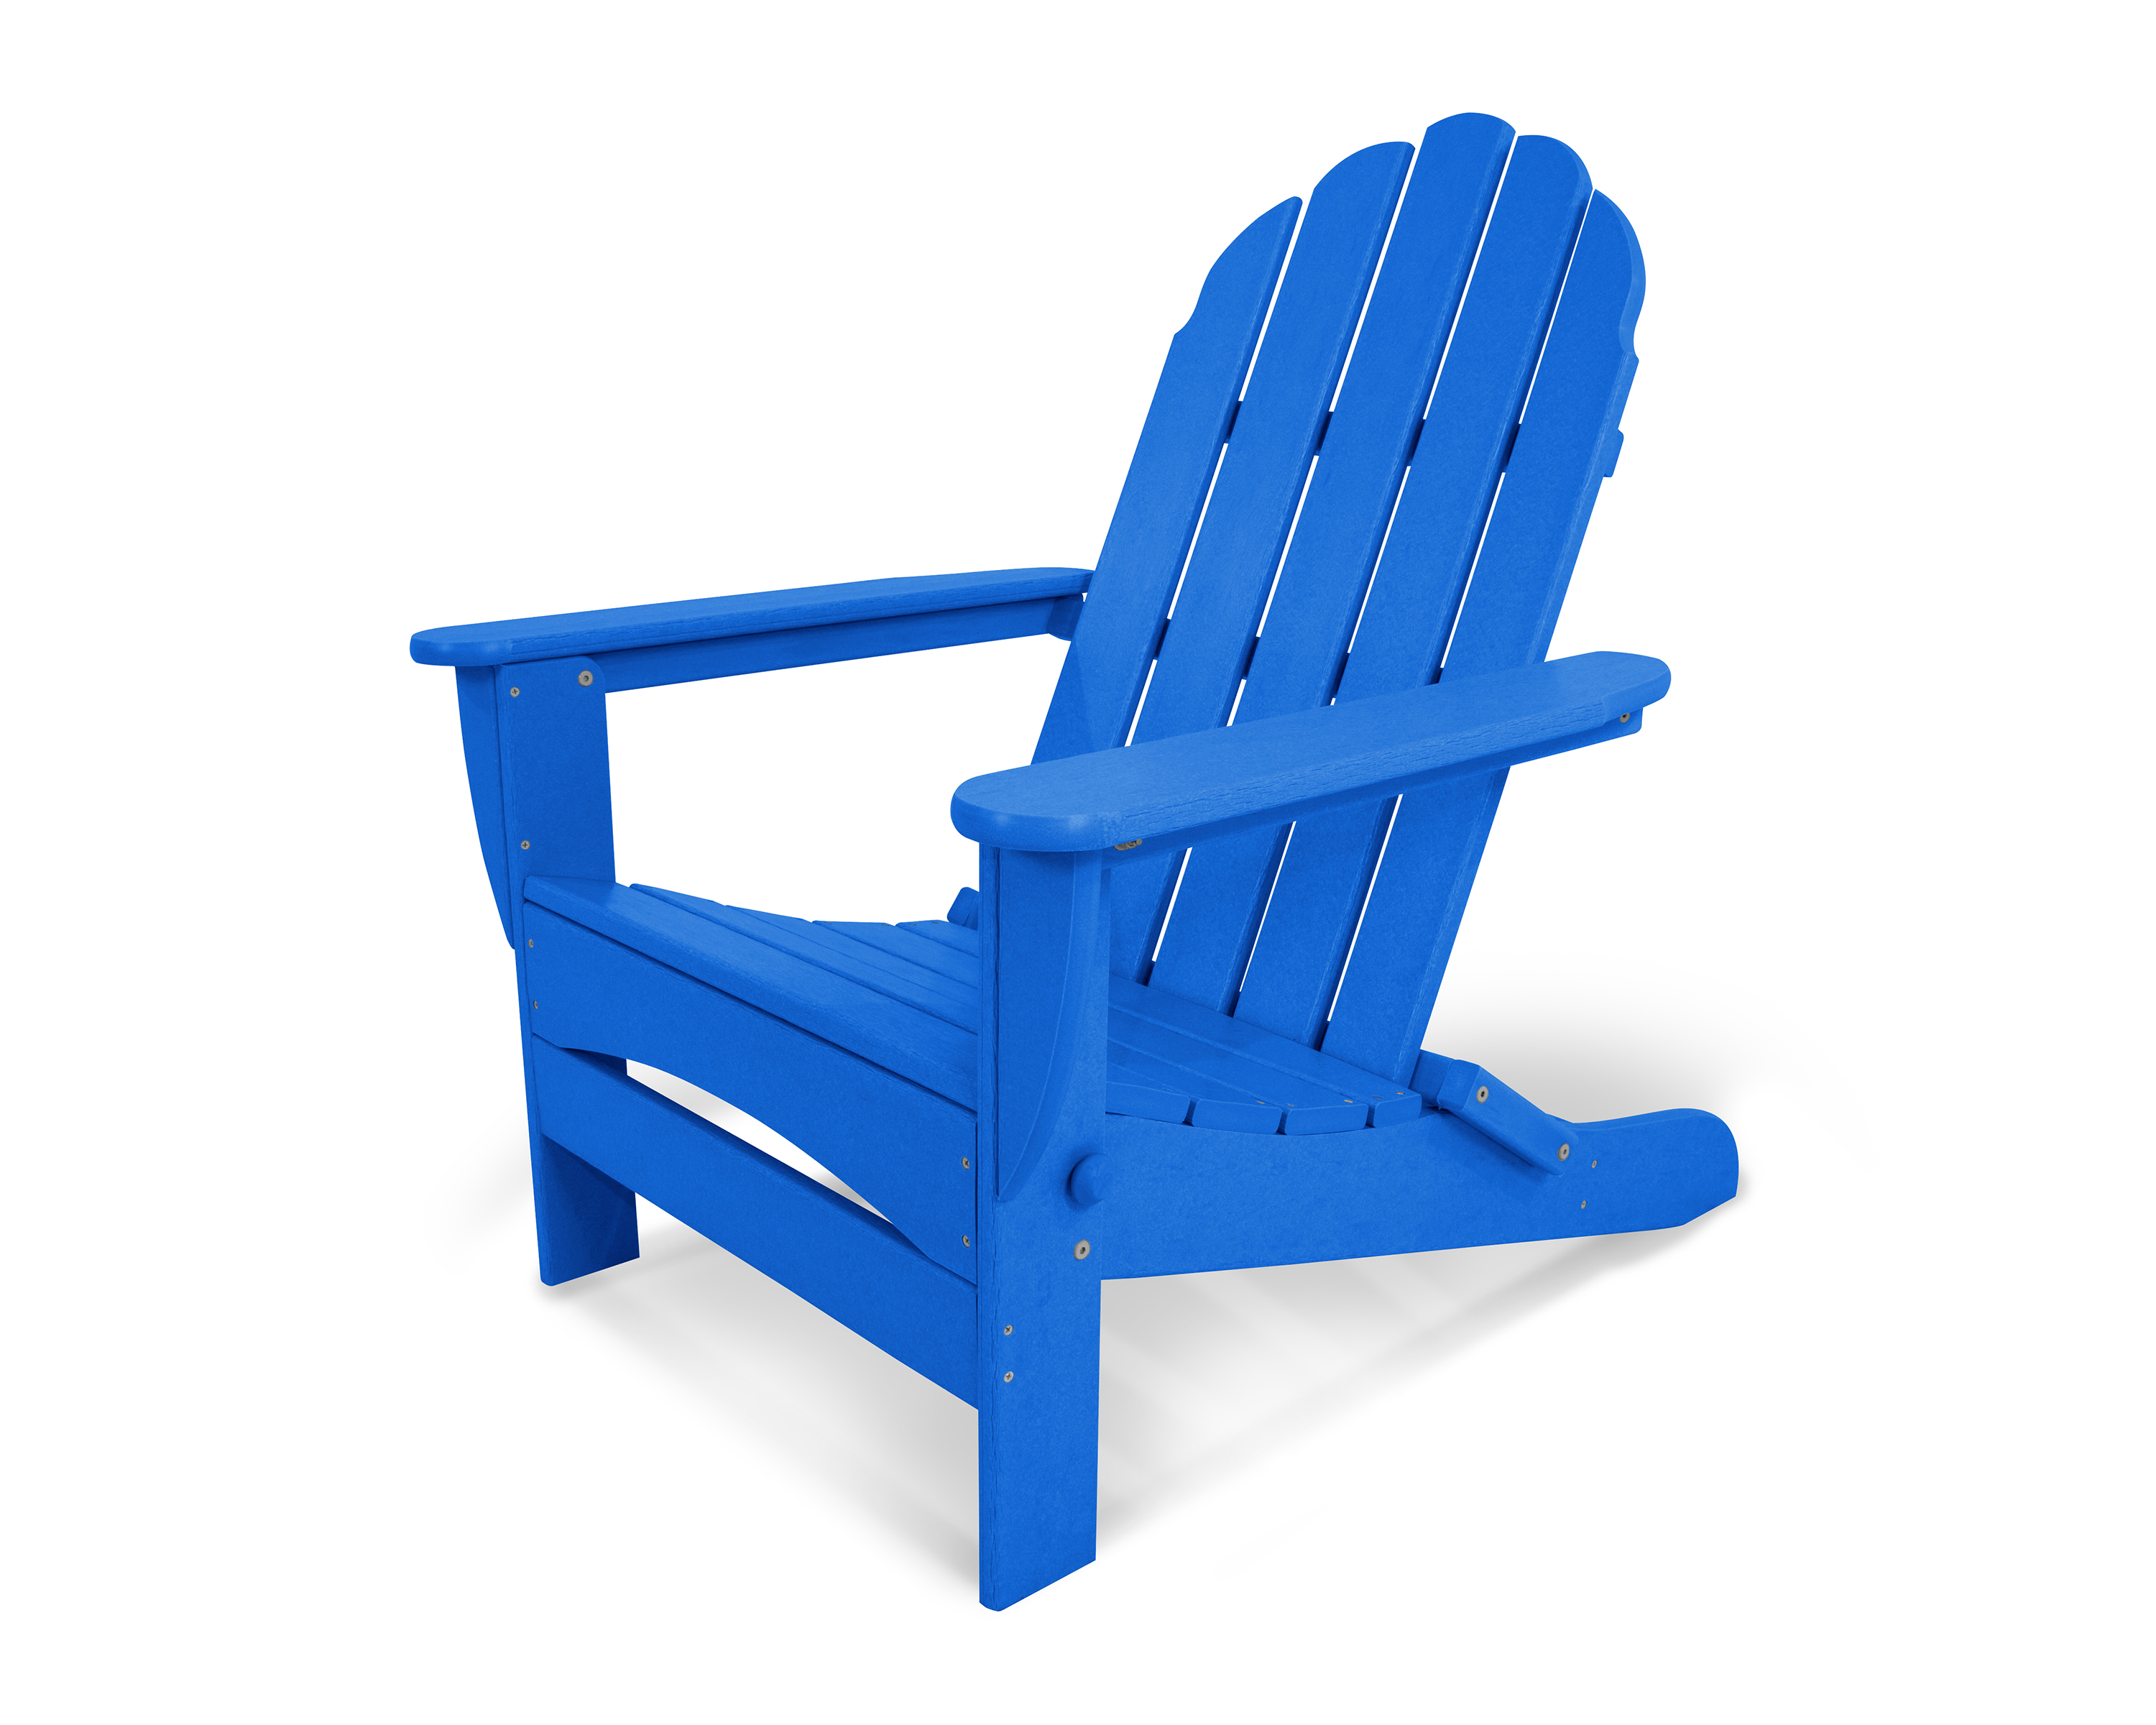 classic oversized adirondack in pacific blue thumbnail image